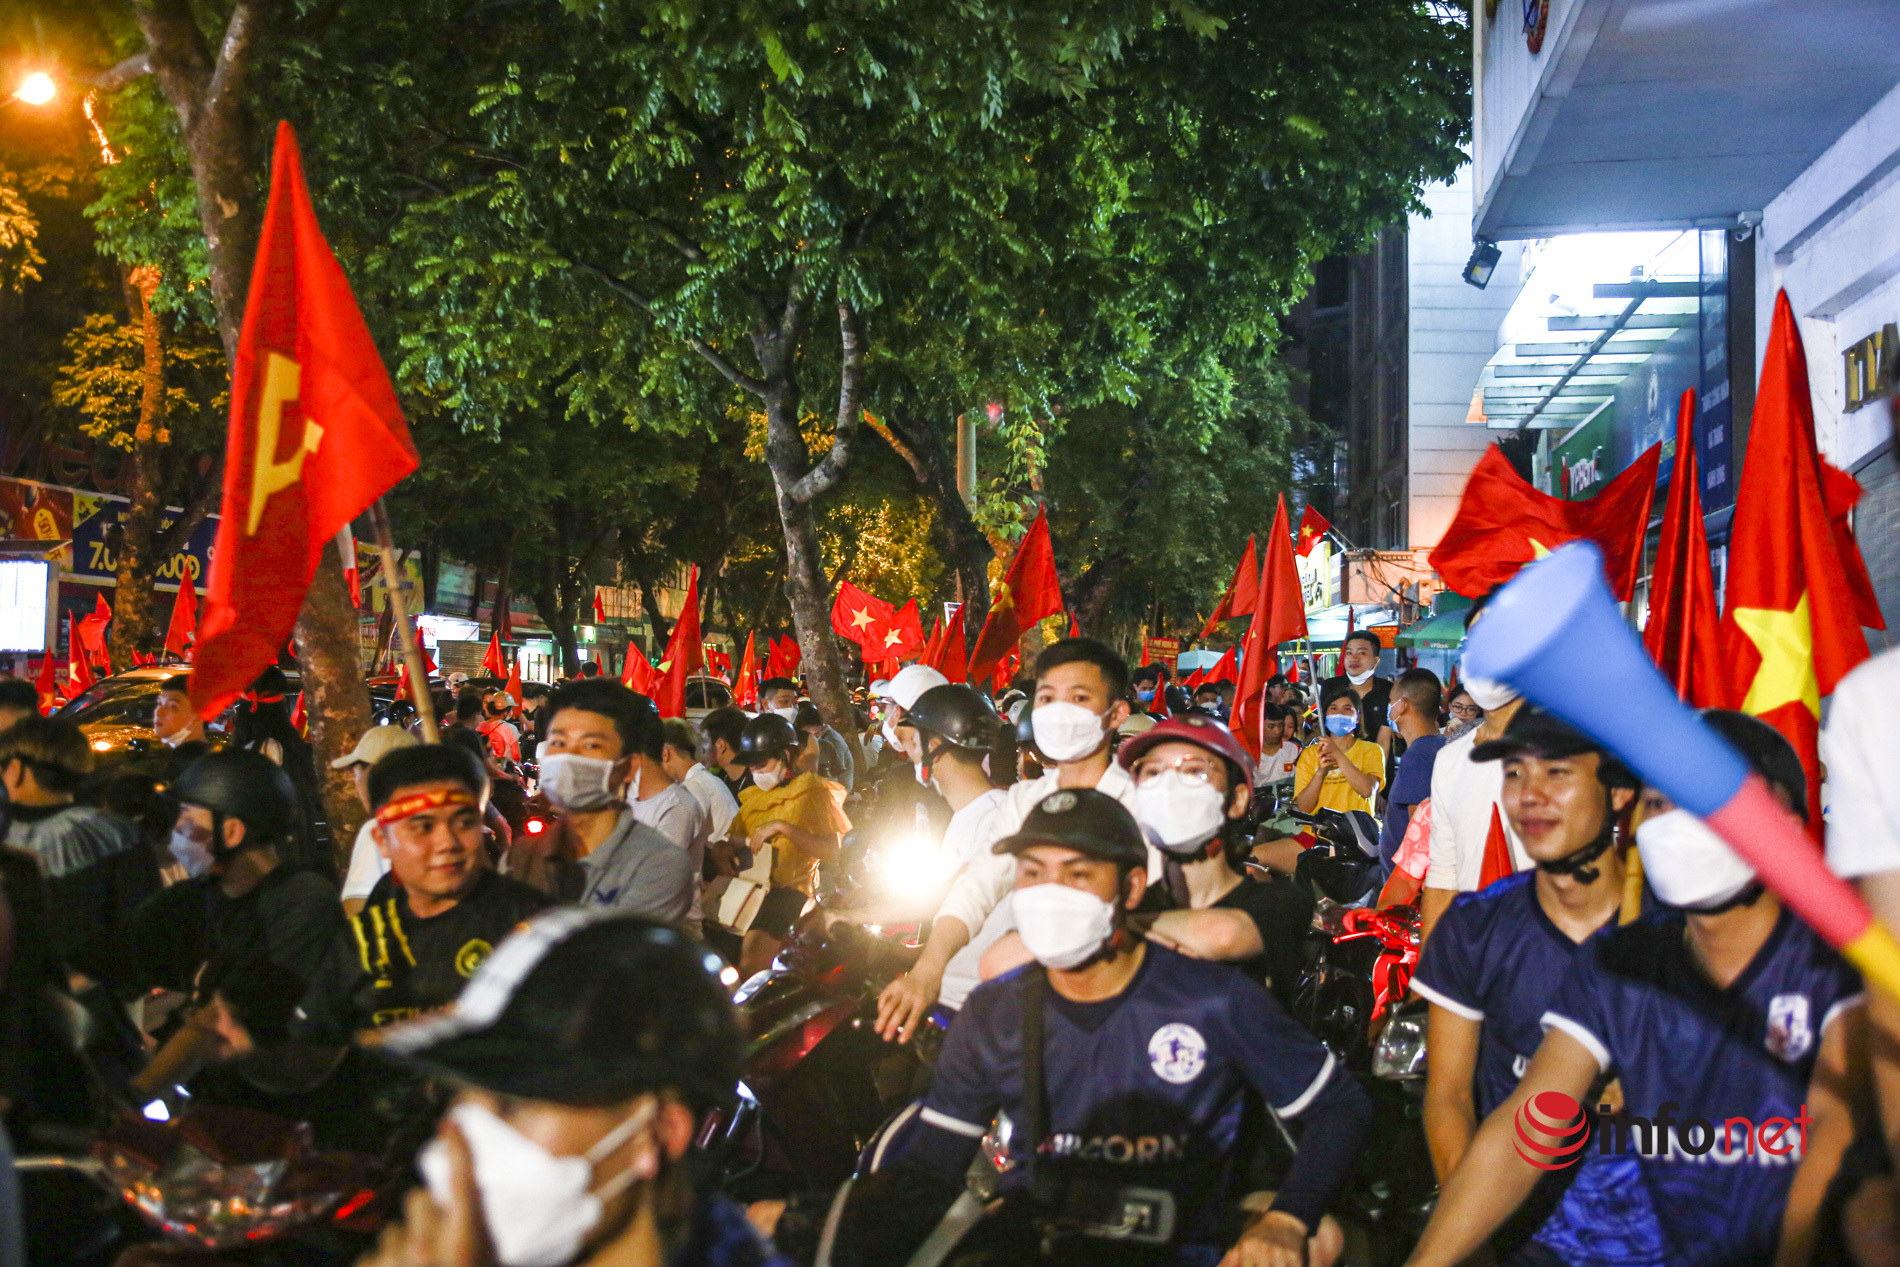 Tens of thousands of fans took to the streets to 'go storm' after the victory of the U23 Vietnam team